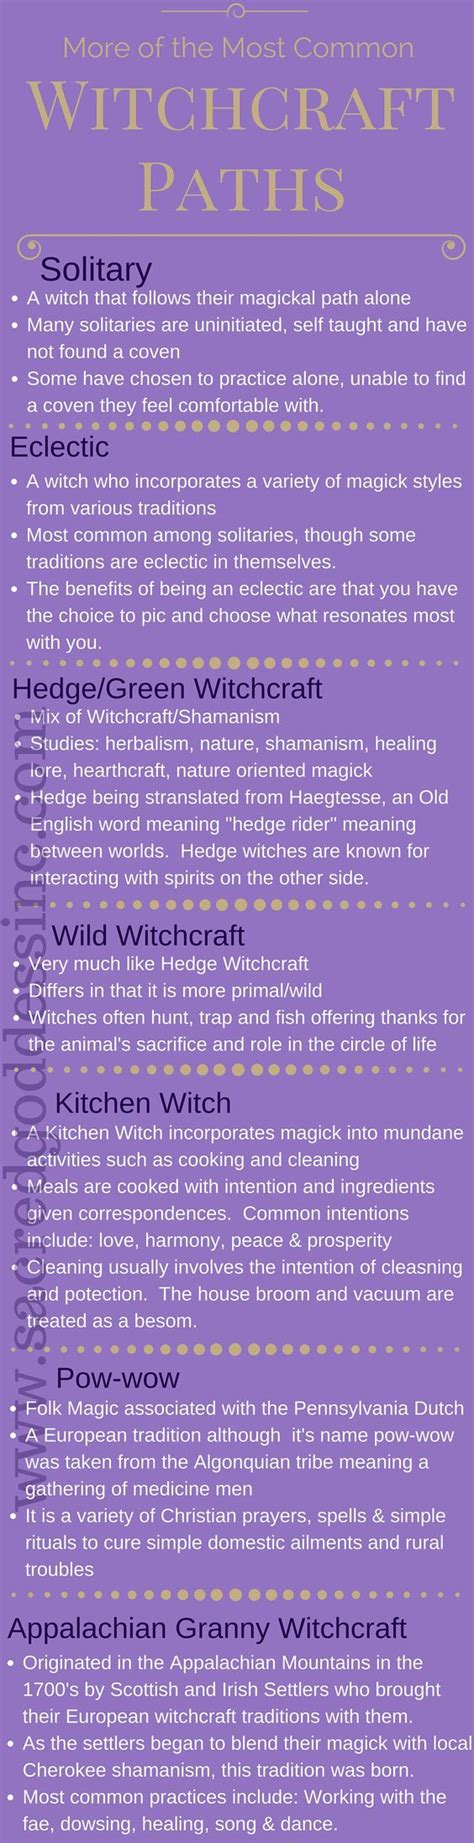 Witchcraft Center Treat: Embracing Ancient Wisdom for Healing